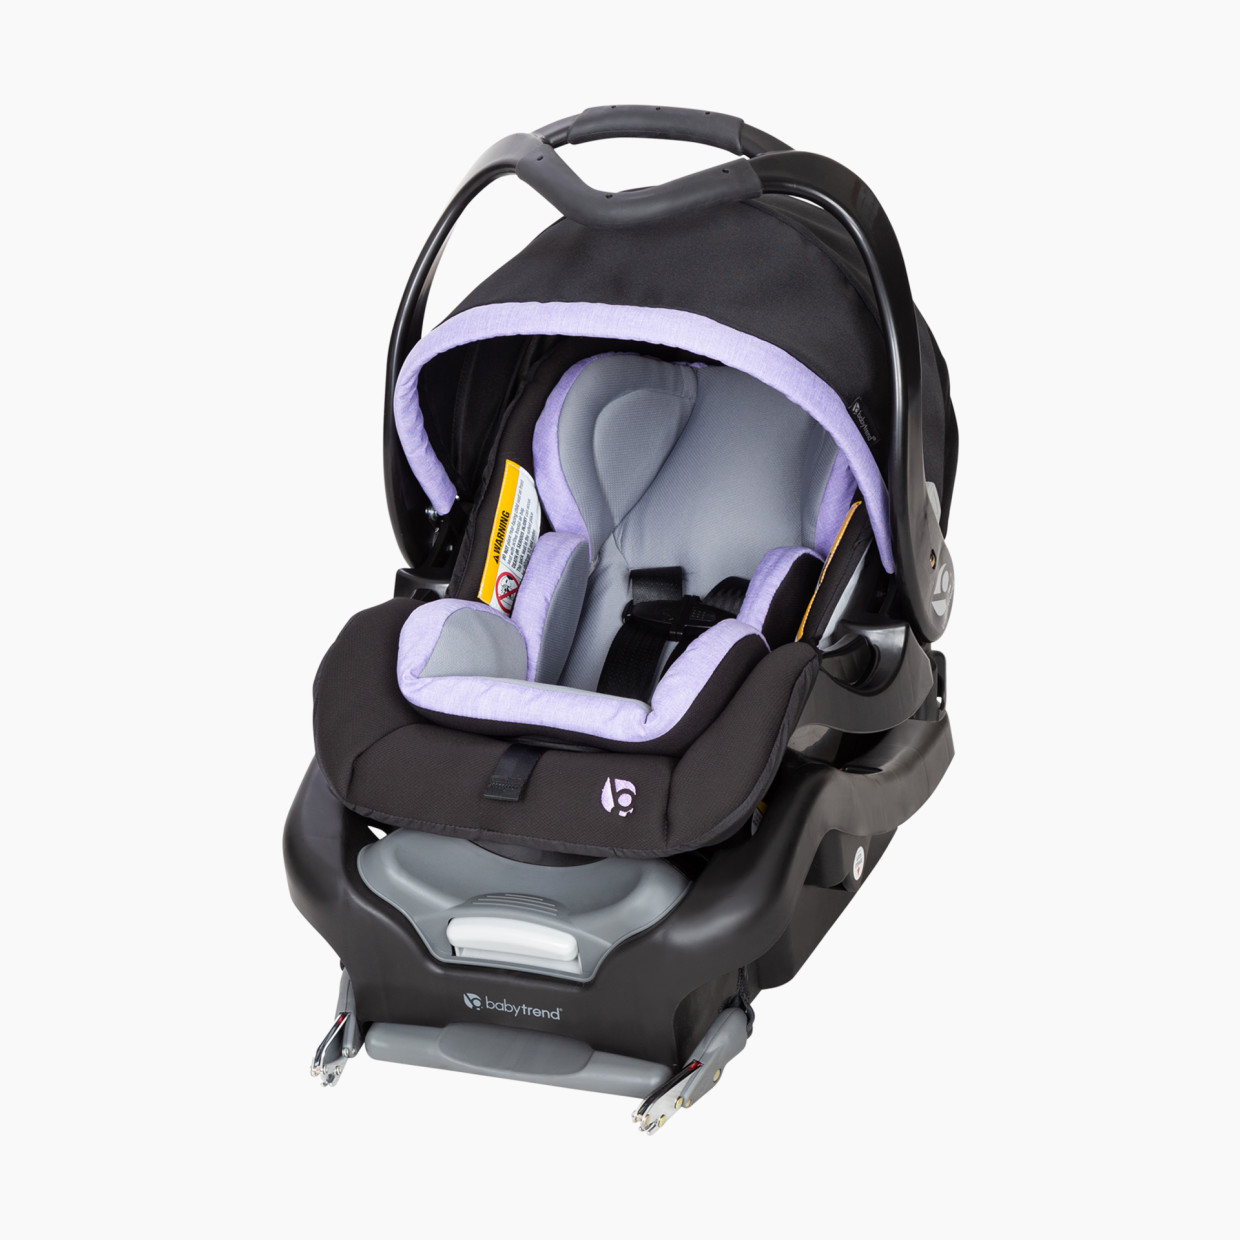 Baby Trend Secure Snap Tech 35 Infant Car Seat - Lavender Ice.